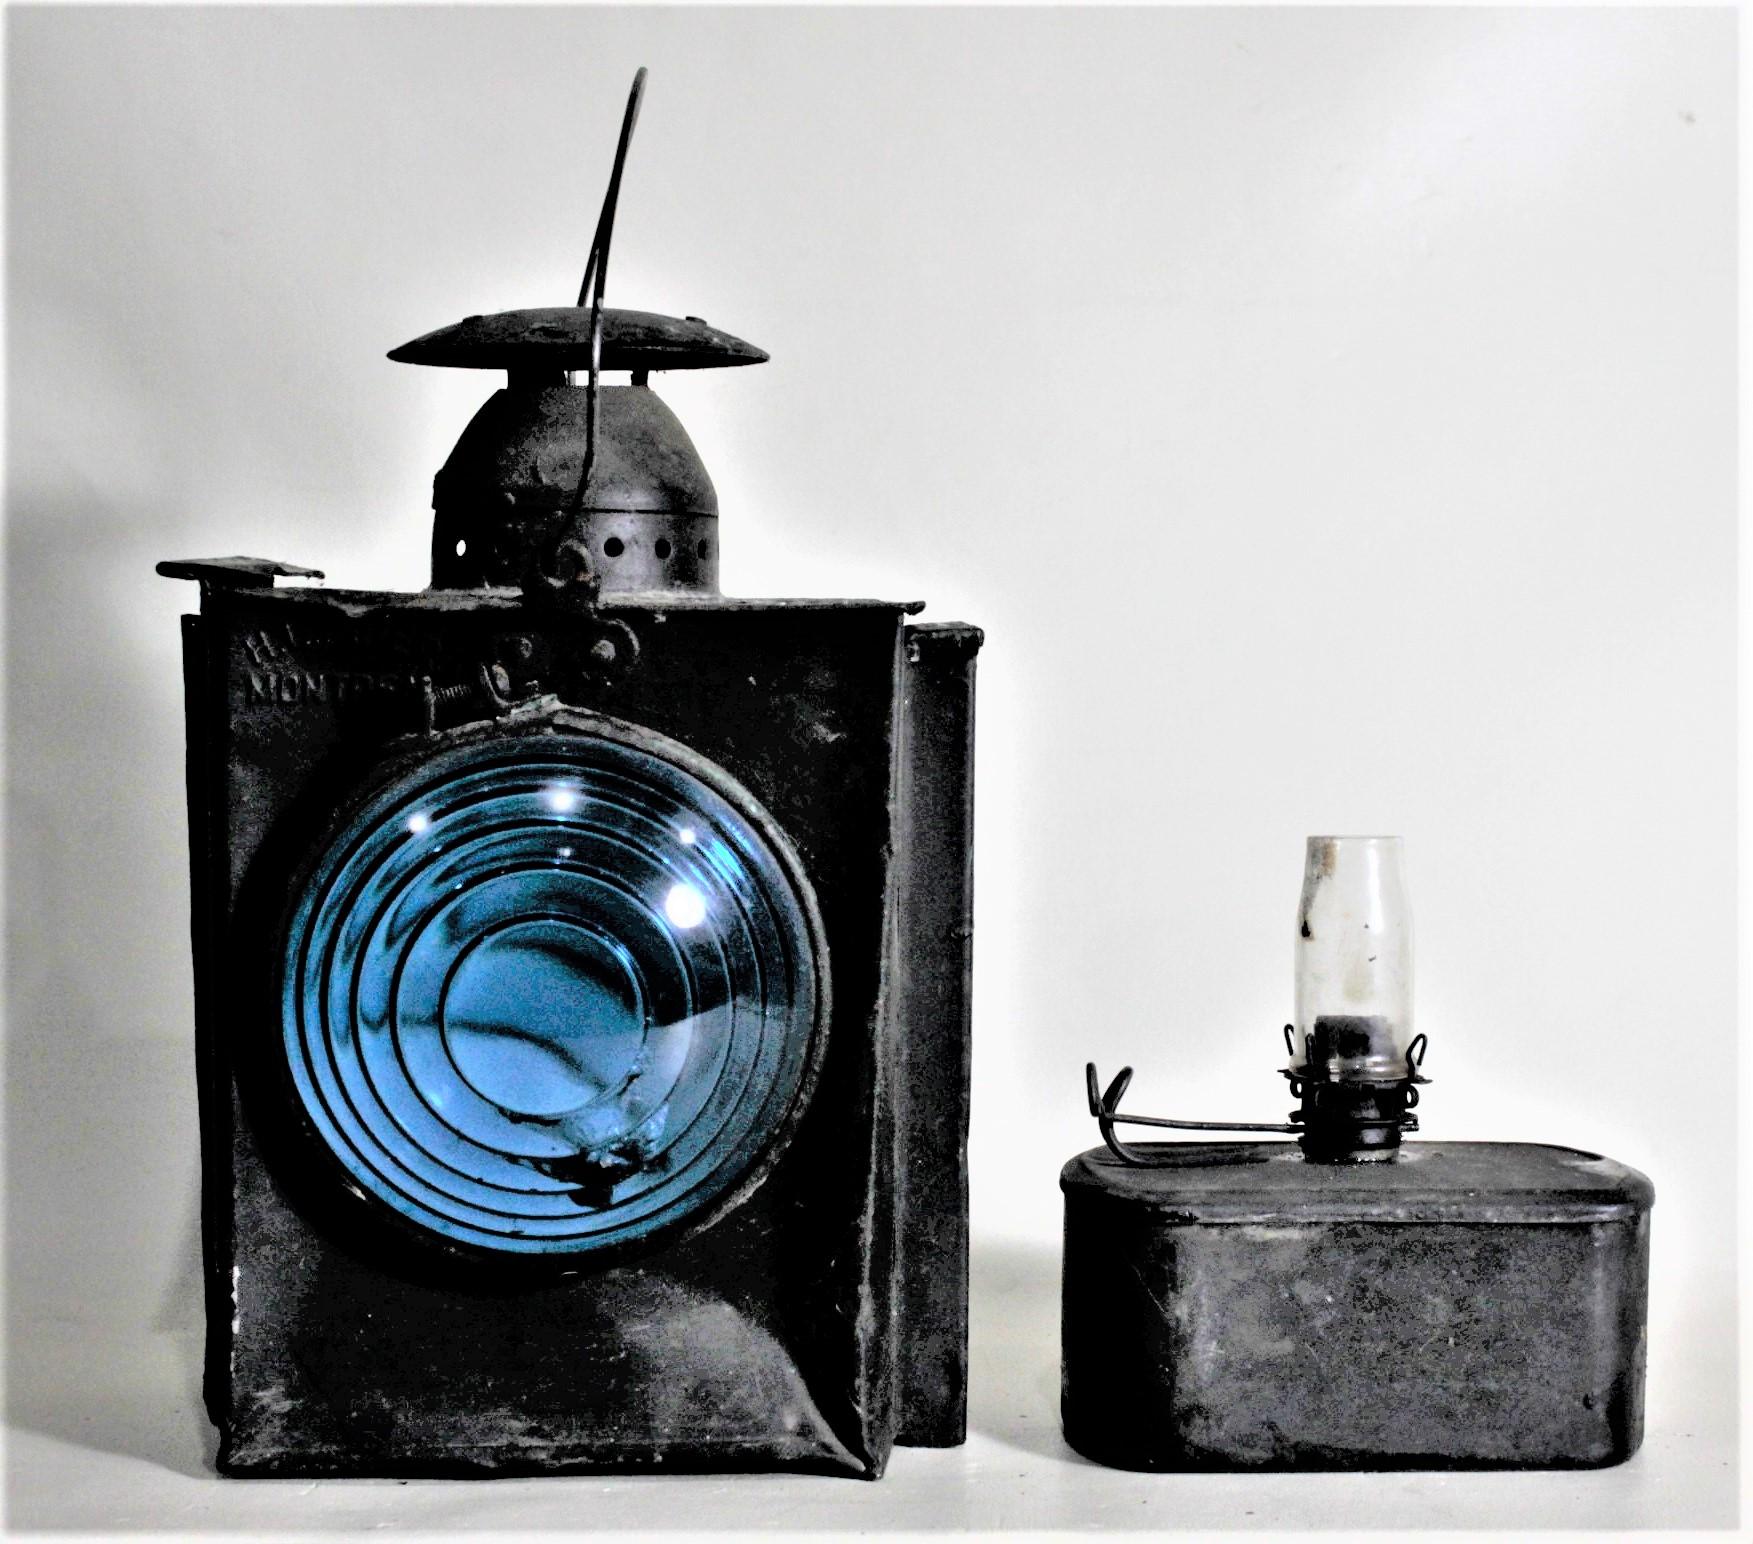 This vintage railroad lantern is remarkably completely unsigned with respect to both the maker, or the railroad company who it was made for. This lantern was most likely made by H.R. Piper, as it was found in Canada, but it could as easily be made